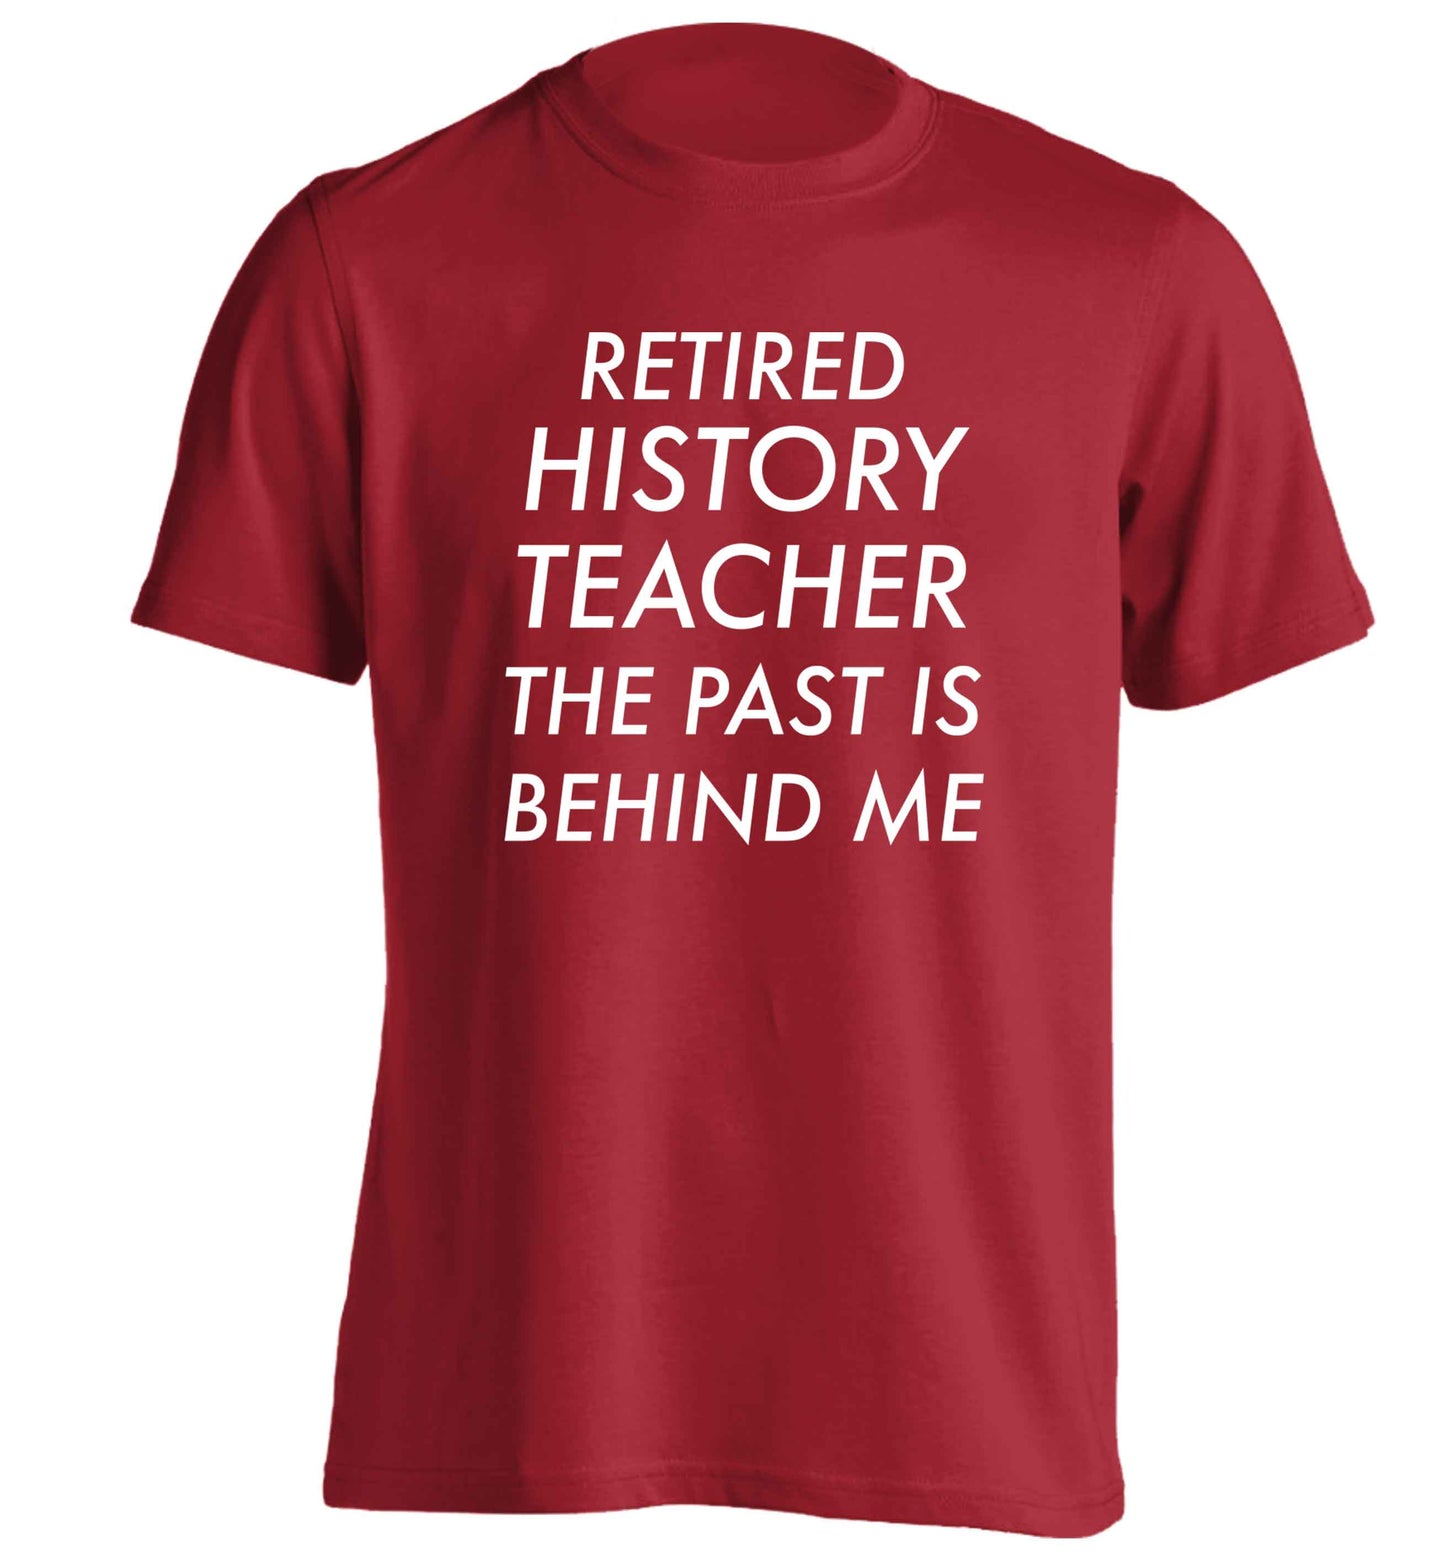 Retired history teacher the past is behind me adults unisex red Tshirt 2XL